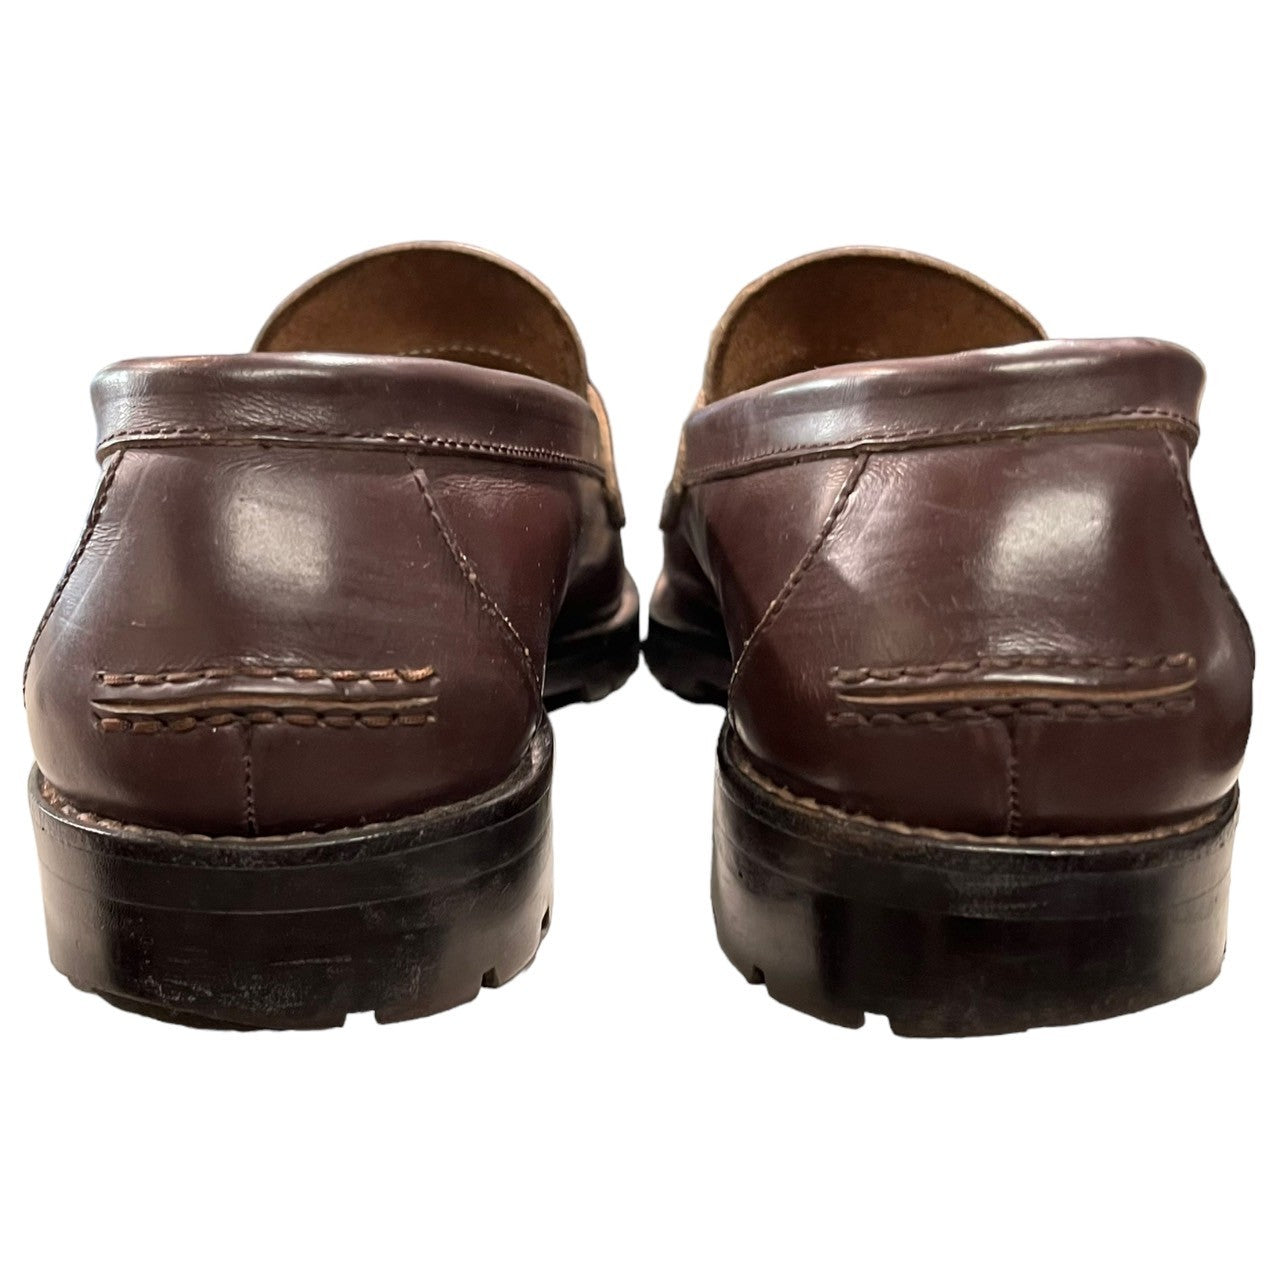 COMME des GARCONS HOMME(コムデギャルソンオム) 00s command sole loafers/コマンドソールローファー/革靴 SIZE表記消え(推定24.5cm程度) ブラウン 日本製